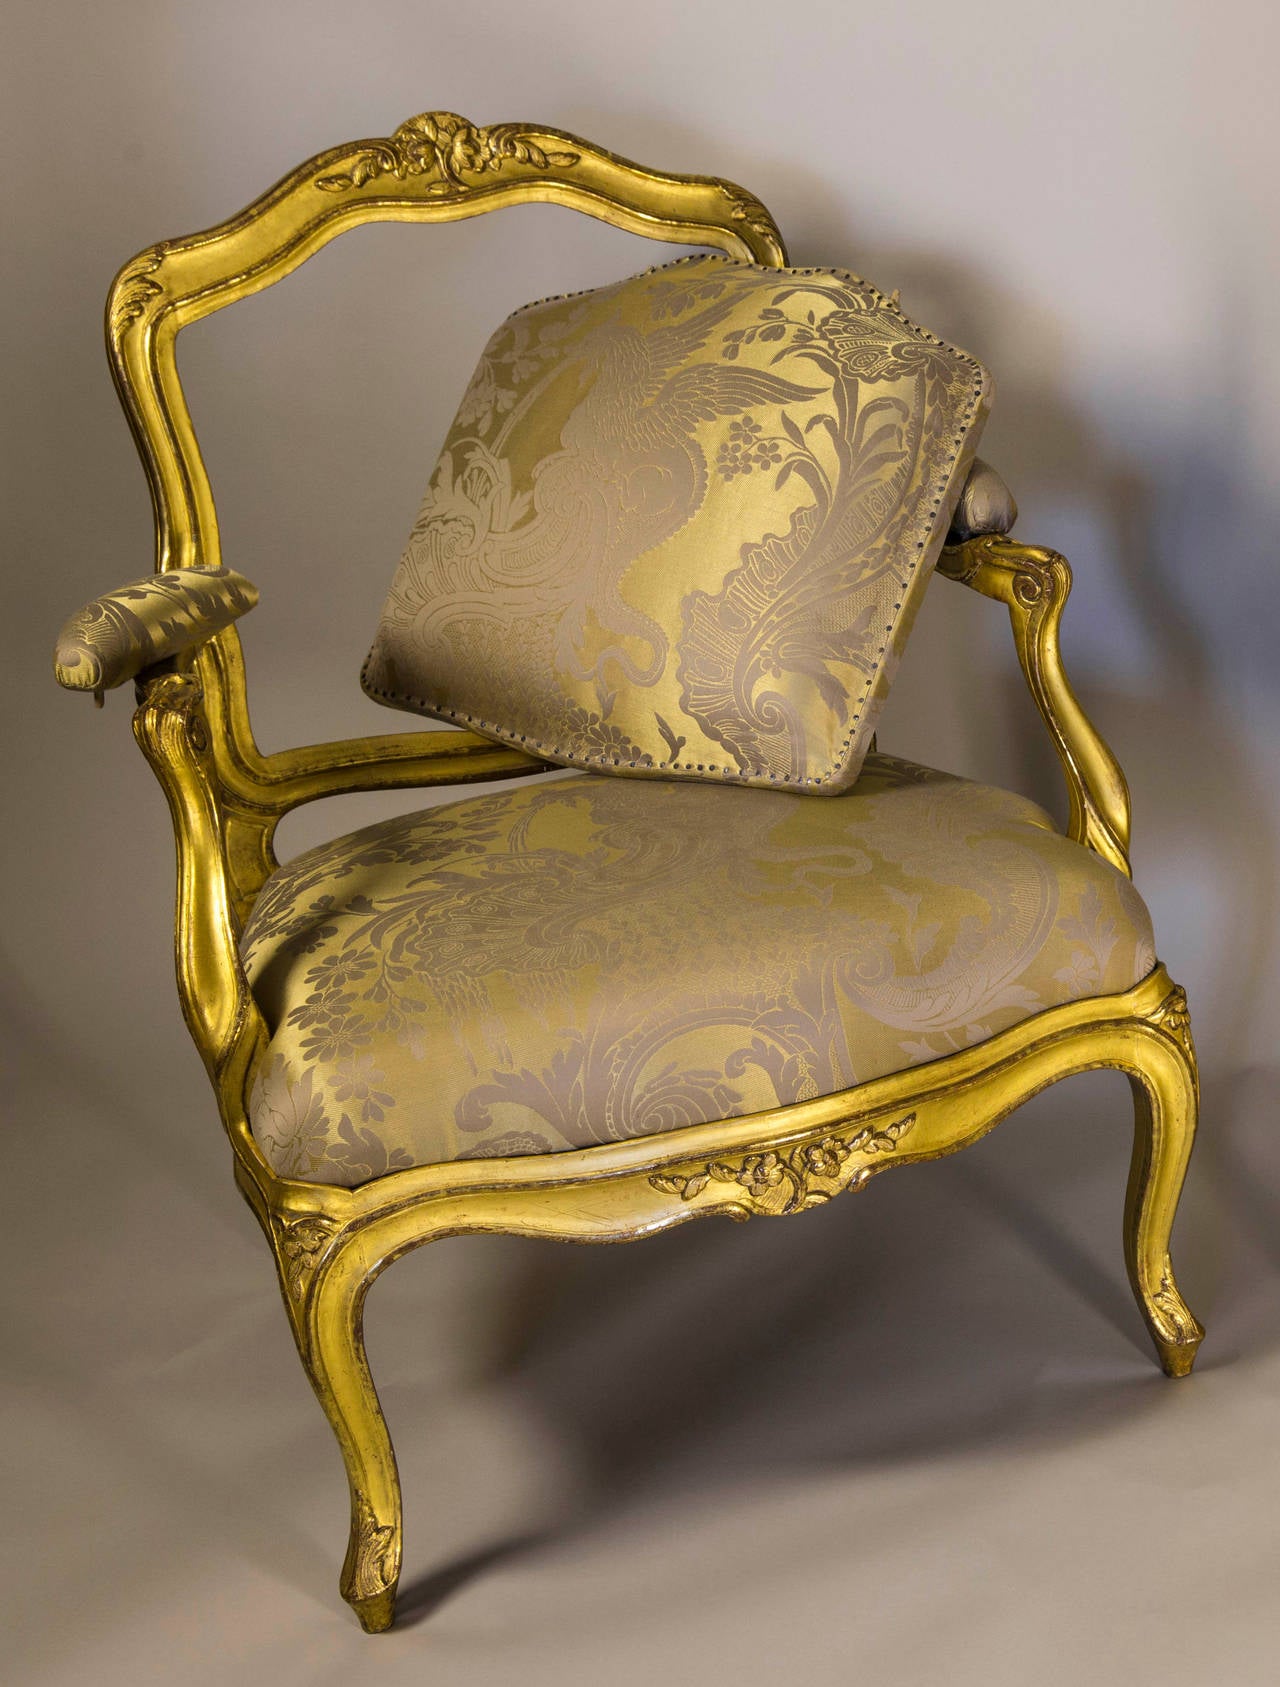 Pair of gilded wood armchairs à châssis of the Louis XV period carved with flowers and acanthus leaves.
Back, base and armrests removable.
This Parisian work is attributed to Jean-Baptiste Meunier (declared master cabinet maker in